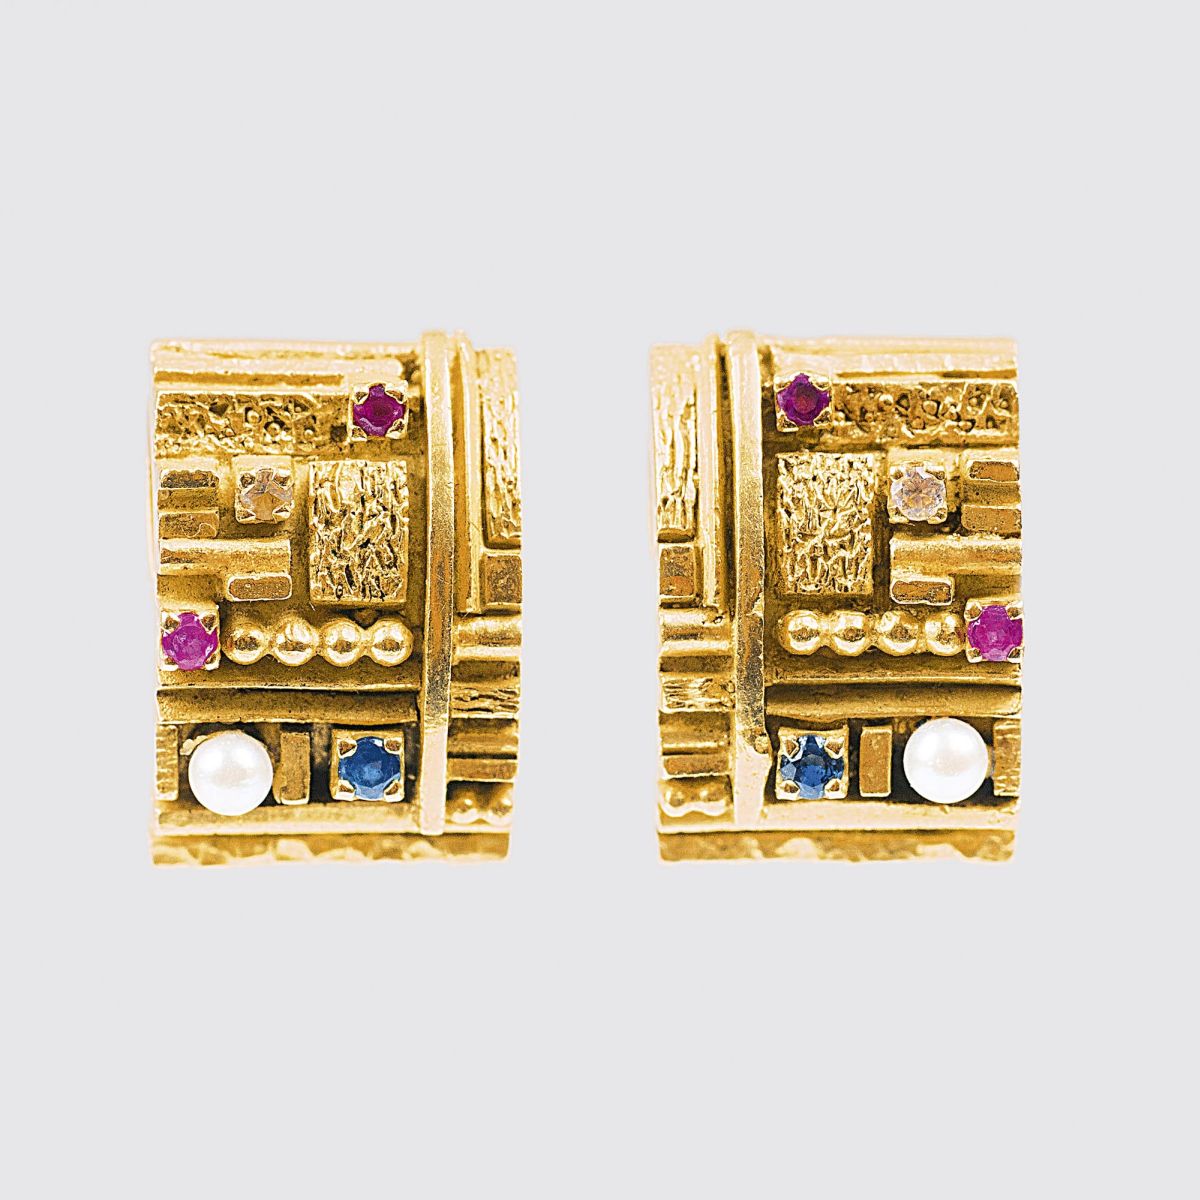 A Pair of Gold Earclips with Gemstones